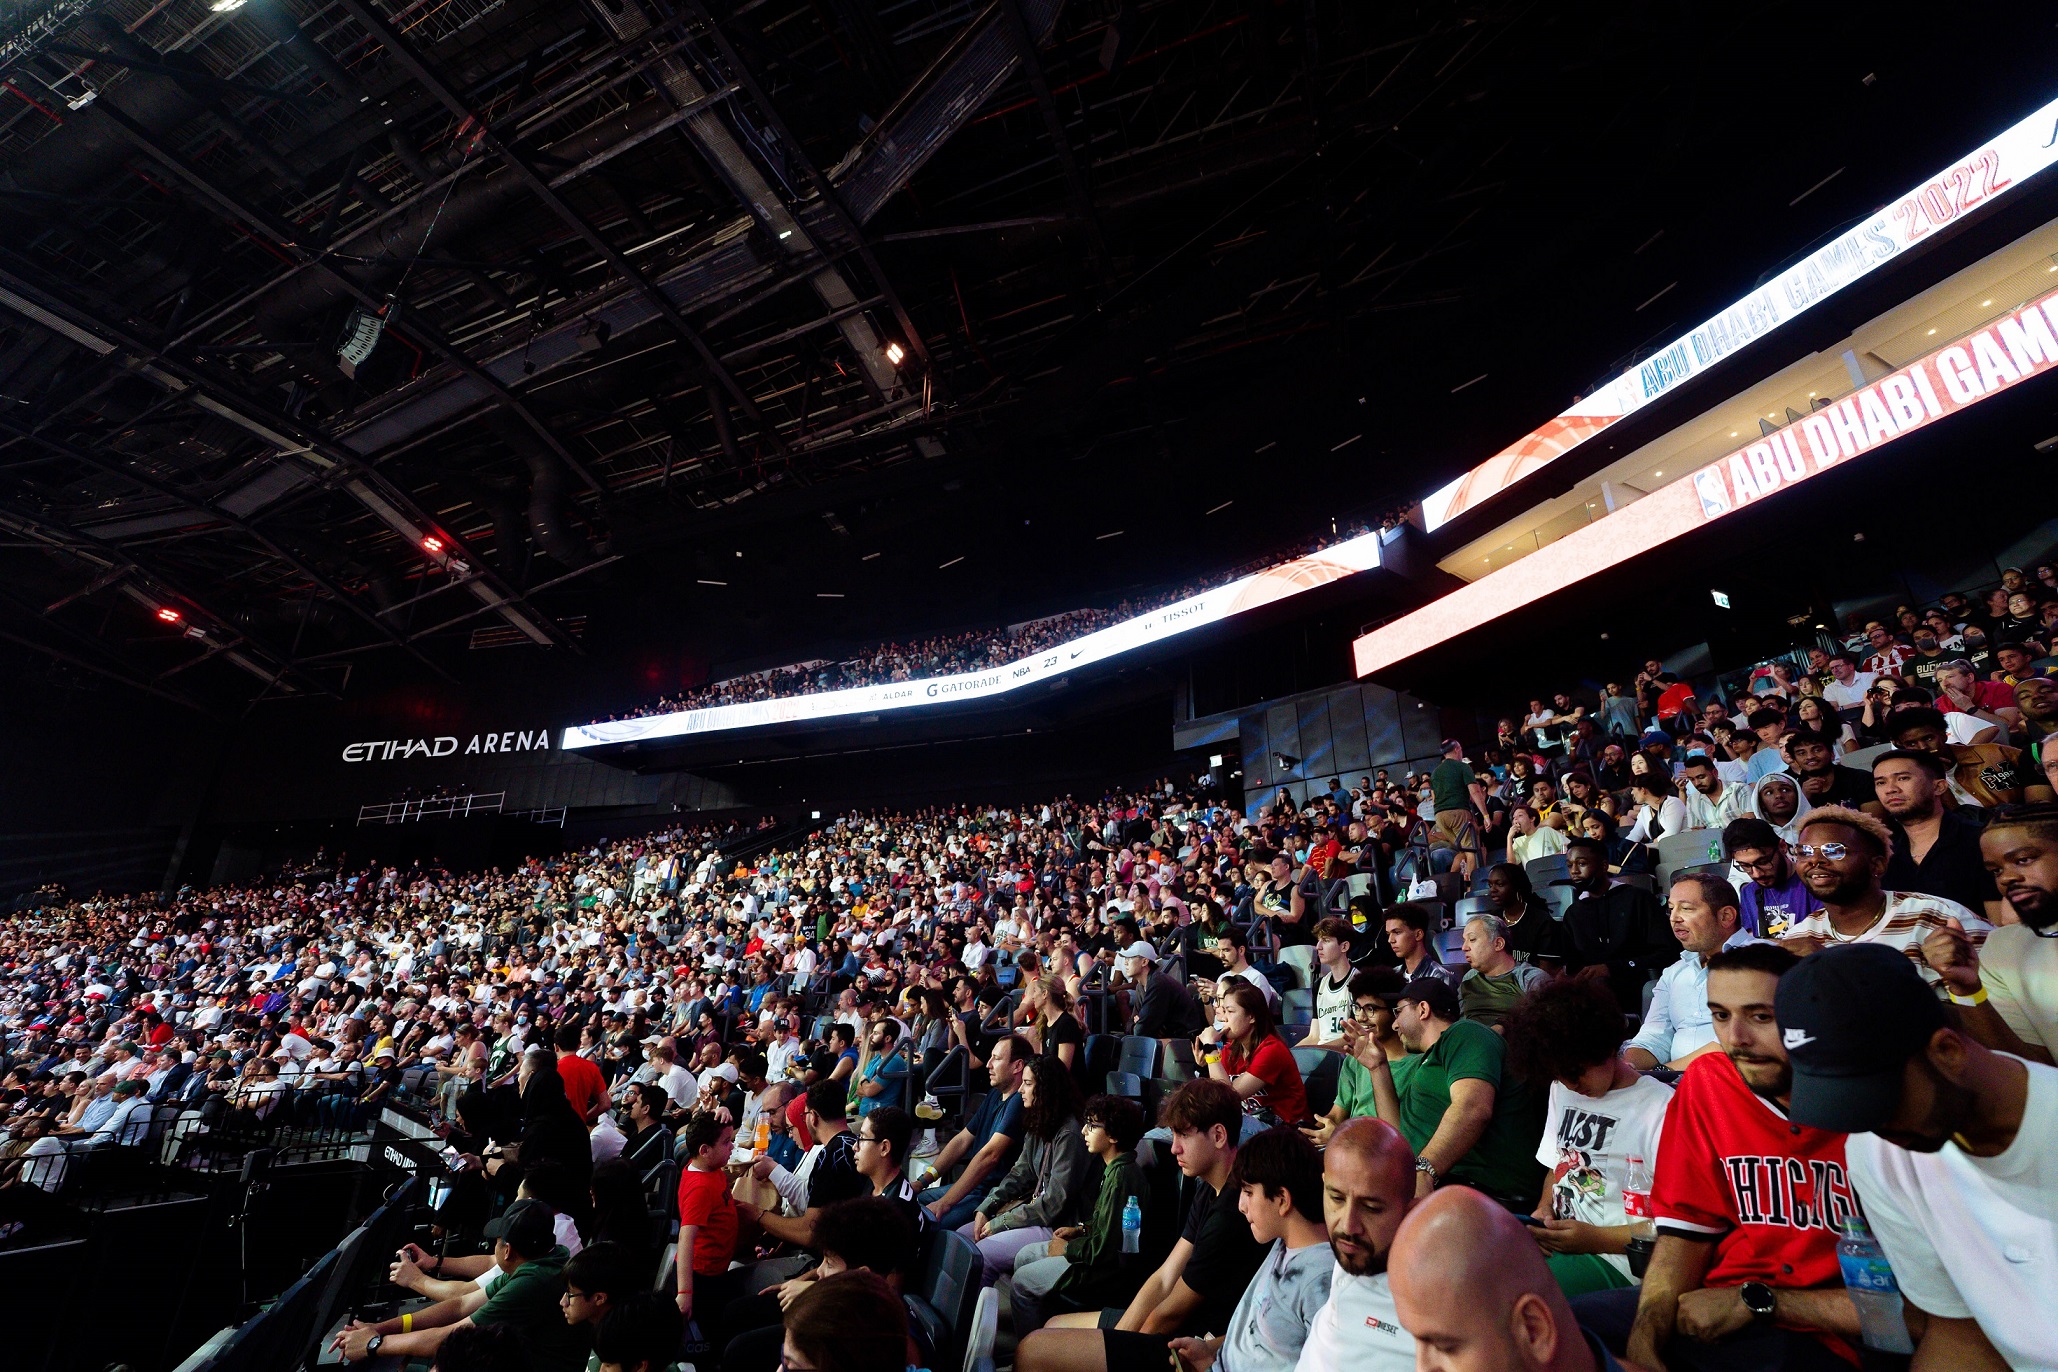 Abu Dhabi’s Status As Global Sports Destination Reaches New Heights With Historic NBA Debut In Front Of Sold-Out Crowd